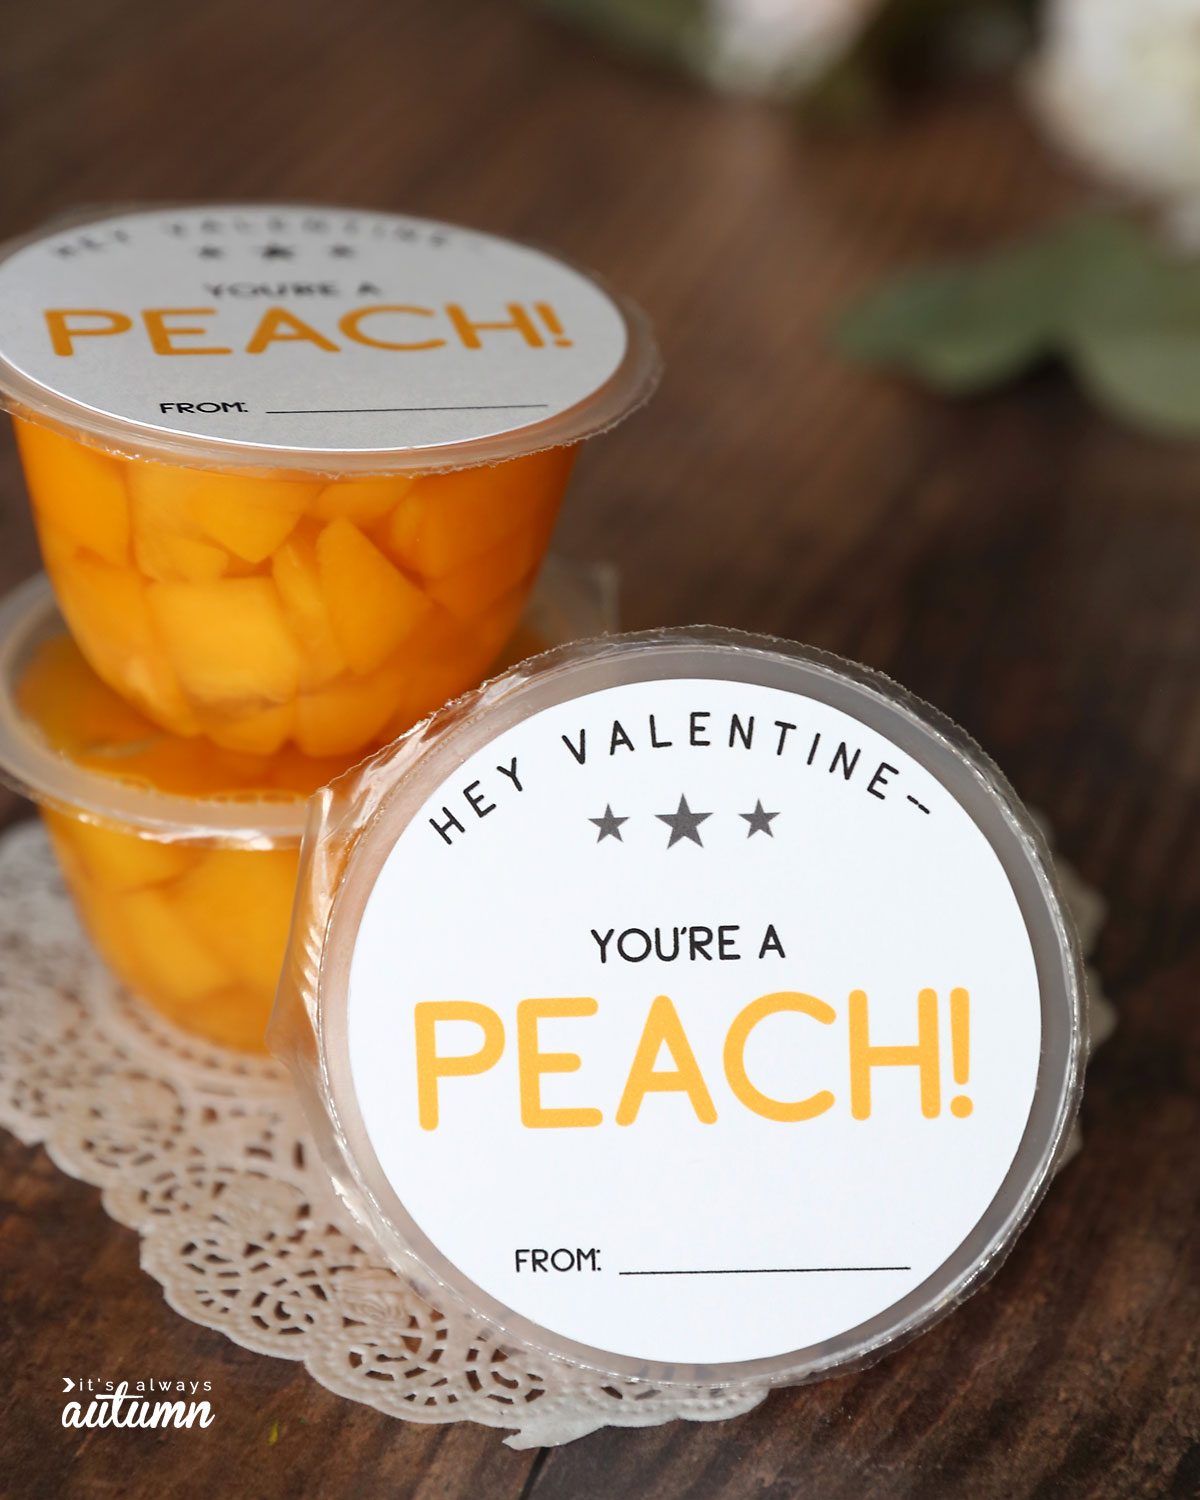 "You're a peach" Valentine printable for peach fruit cups